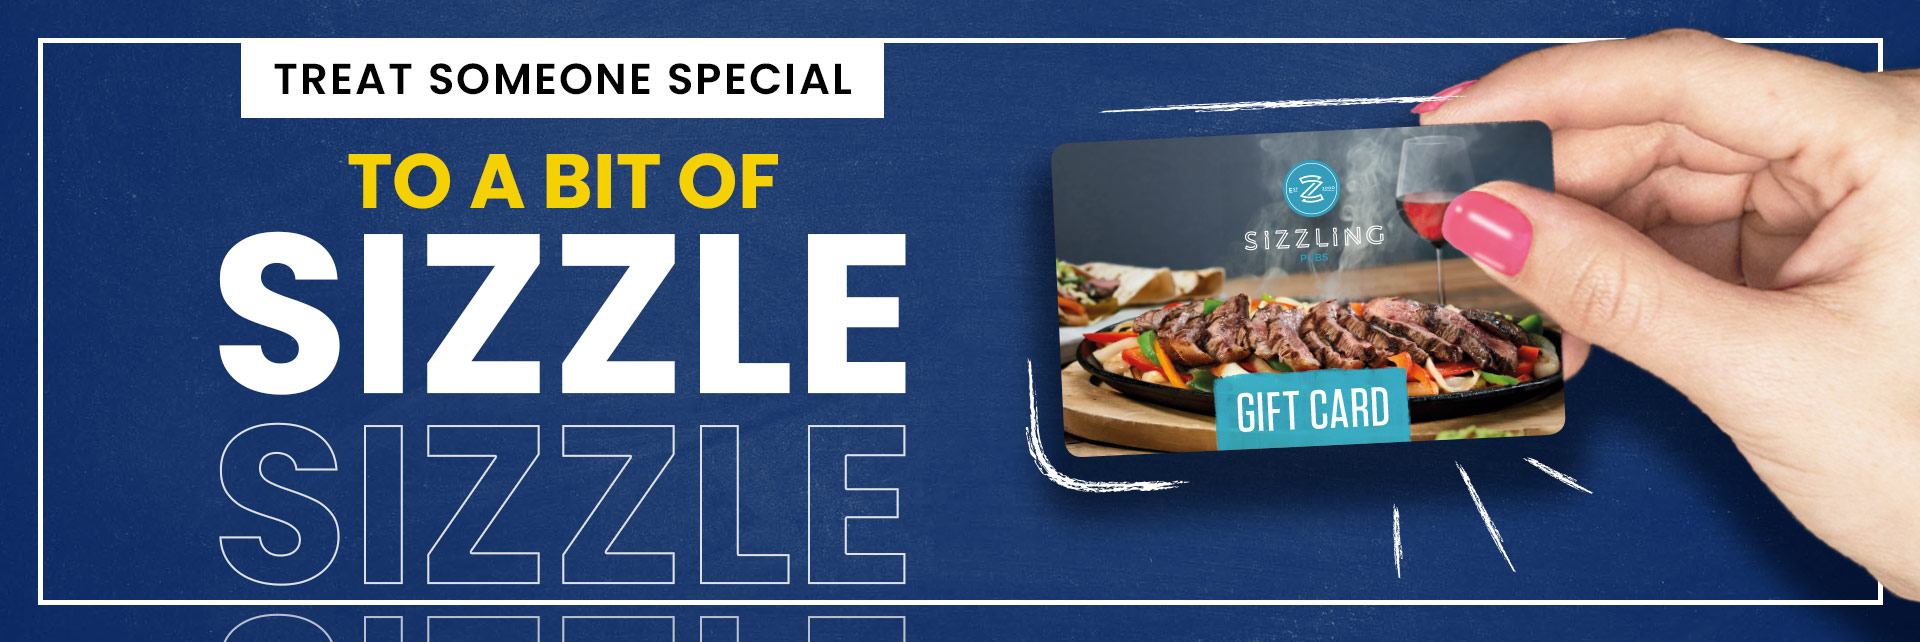 Sizzling Pubs Gift Card at Marmalade Pot in Paisley